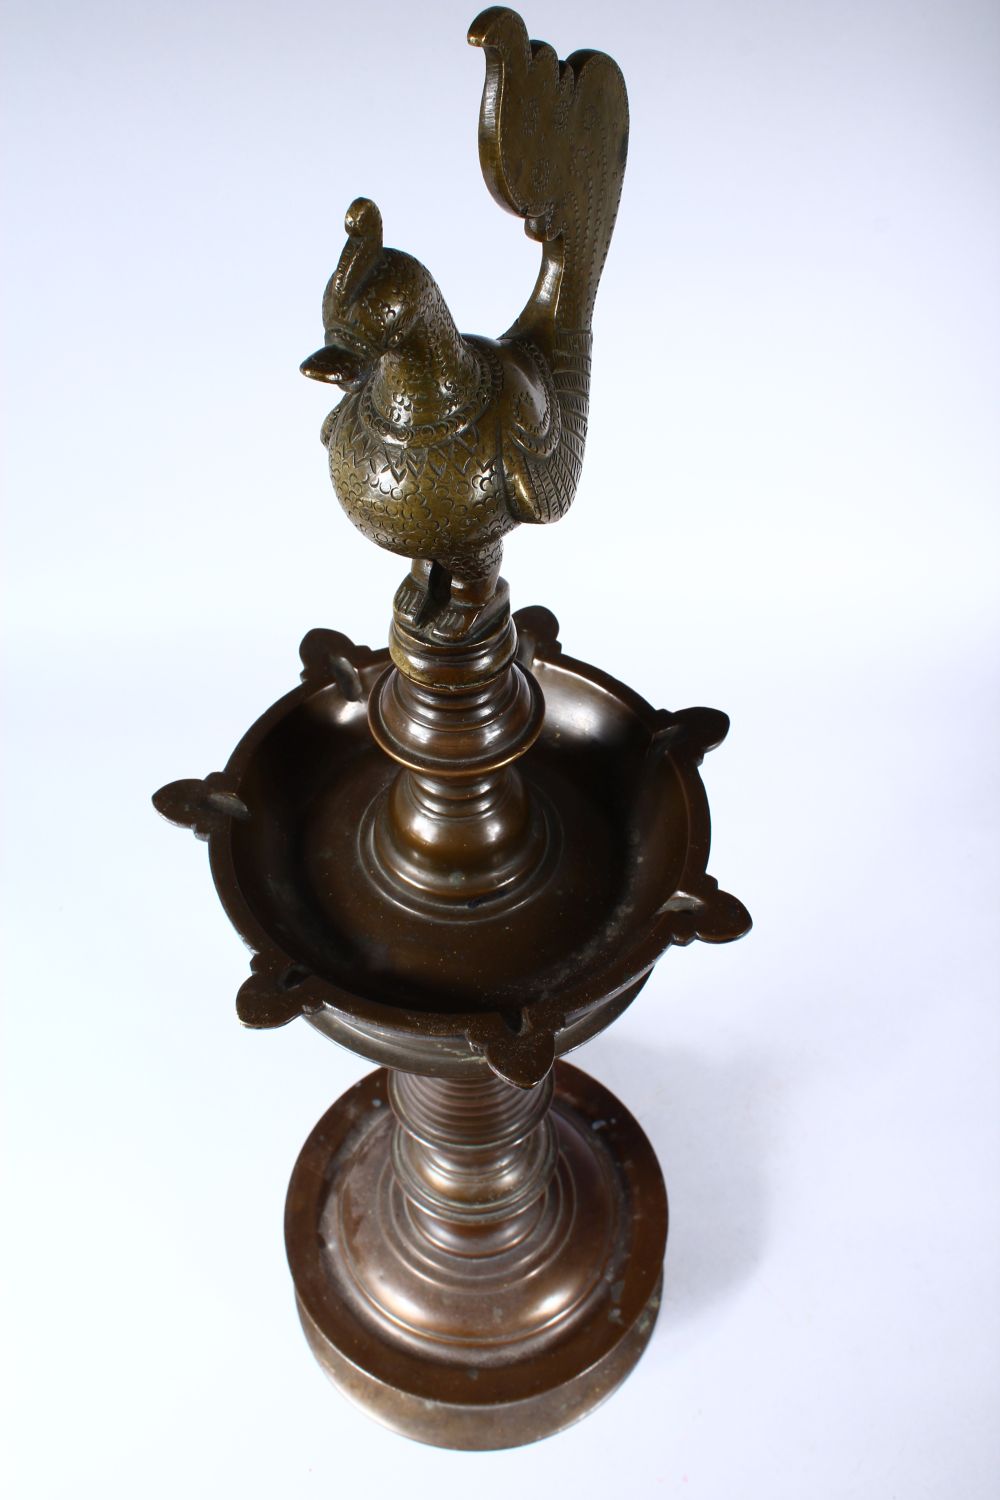 A GOOD 19TH CENTURY INDIAN BRONZE LAMP, with cockerel finial on a circular base, 60cm high. - Image 4 of 4